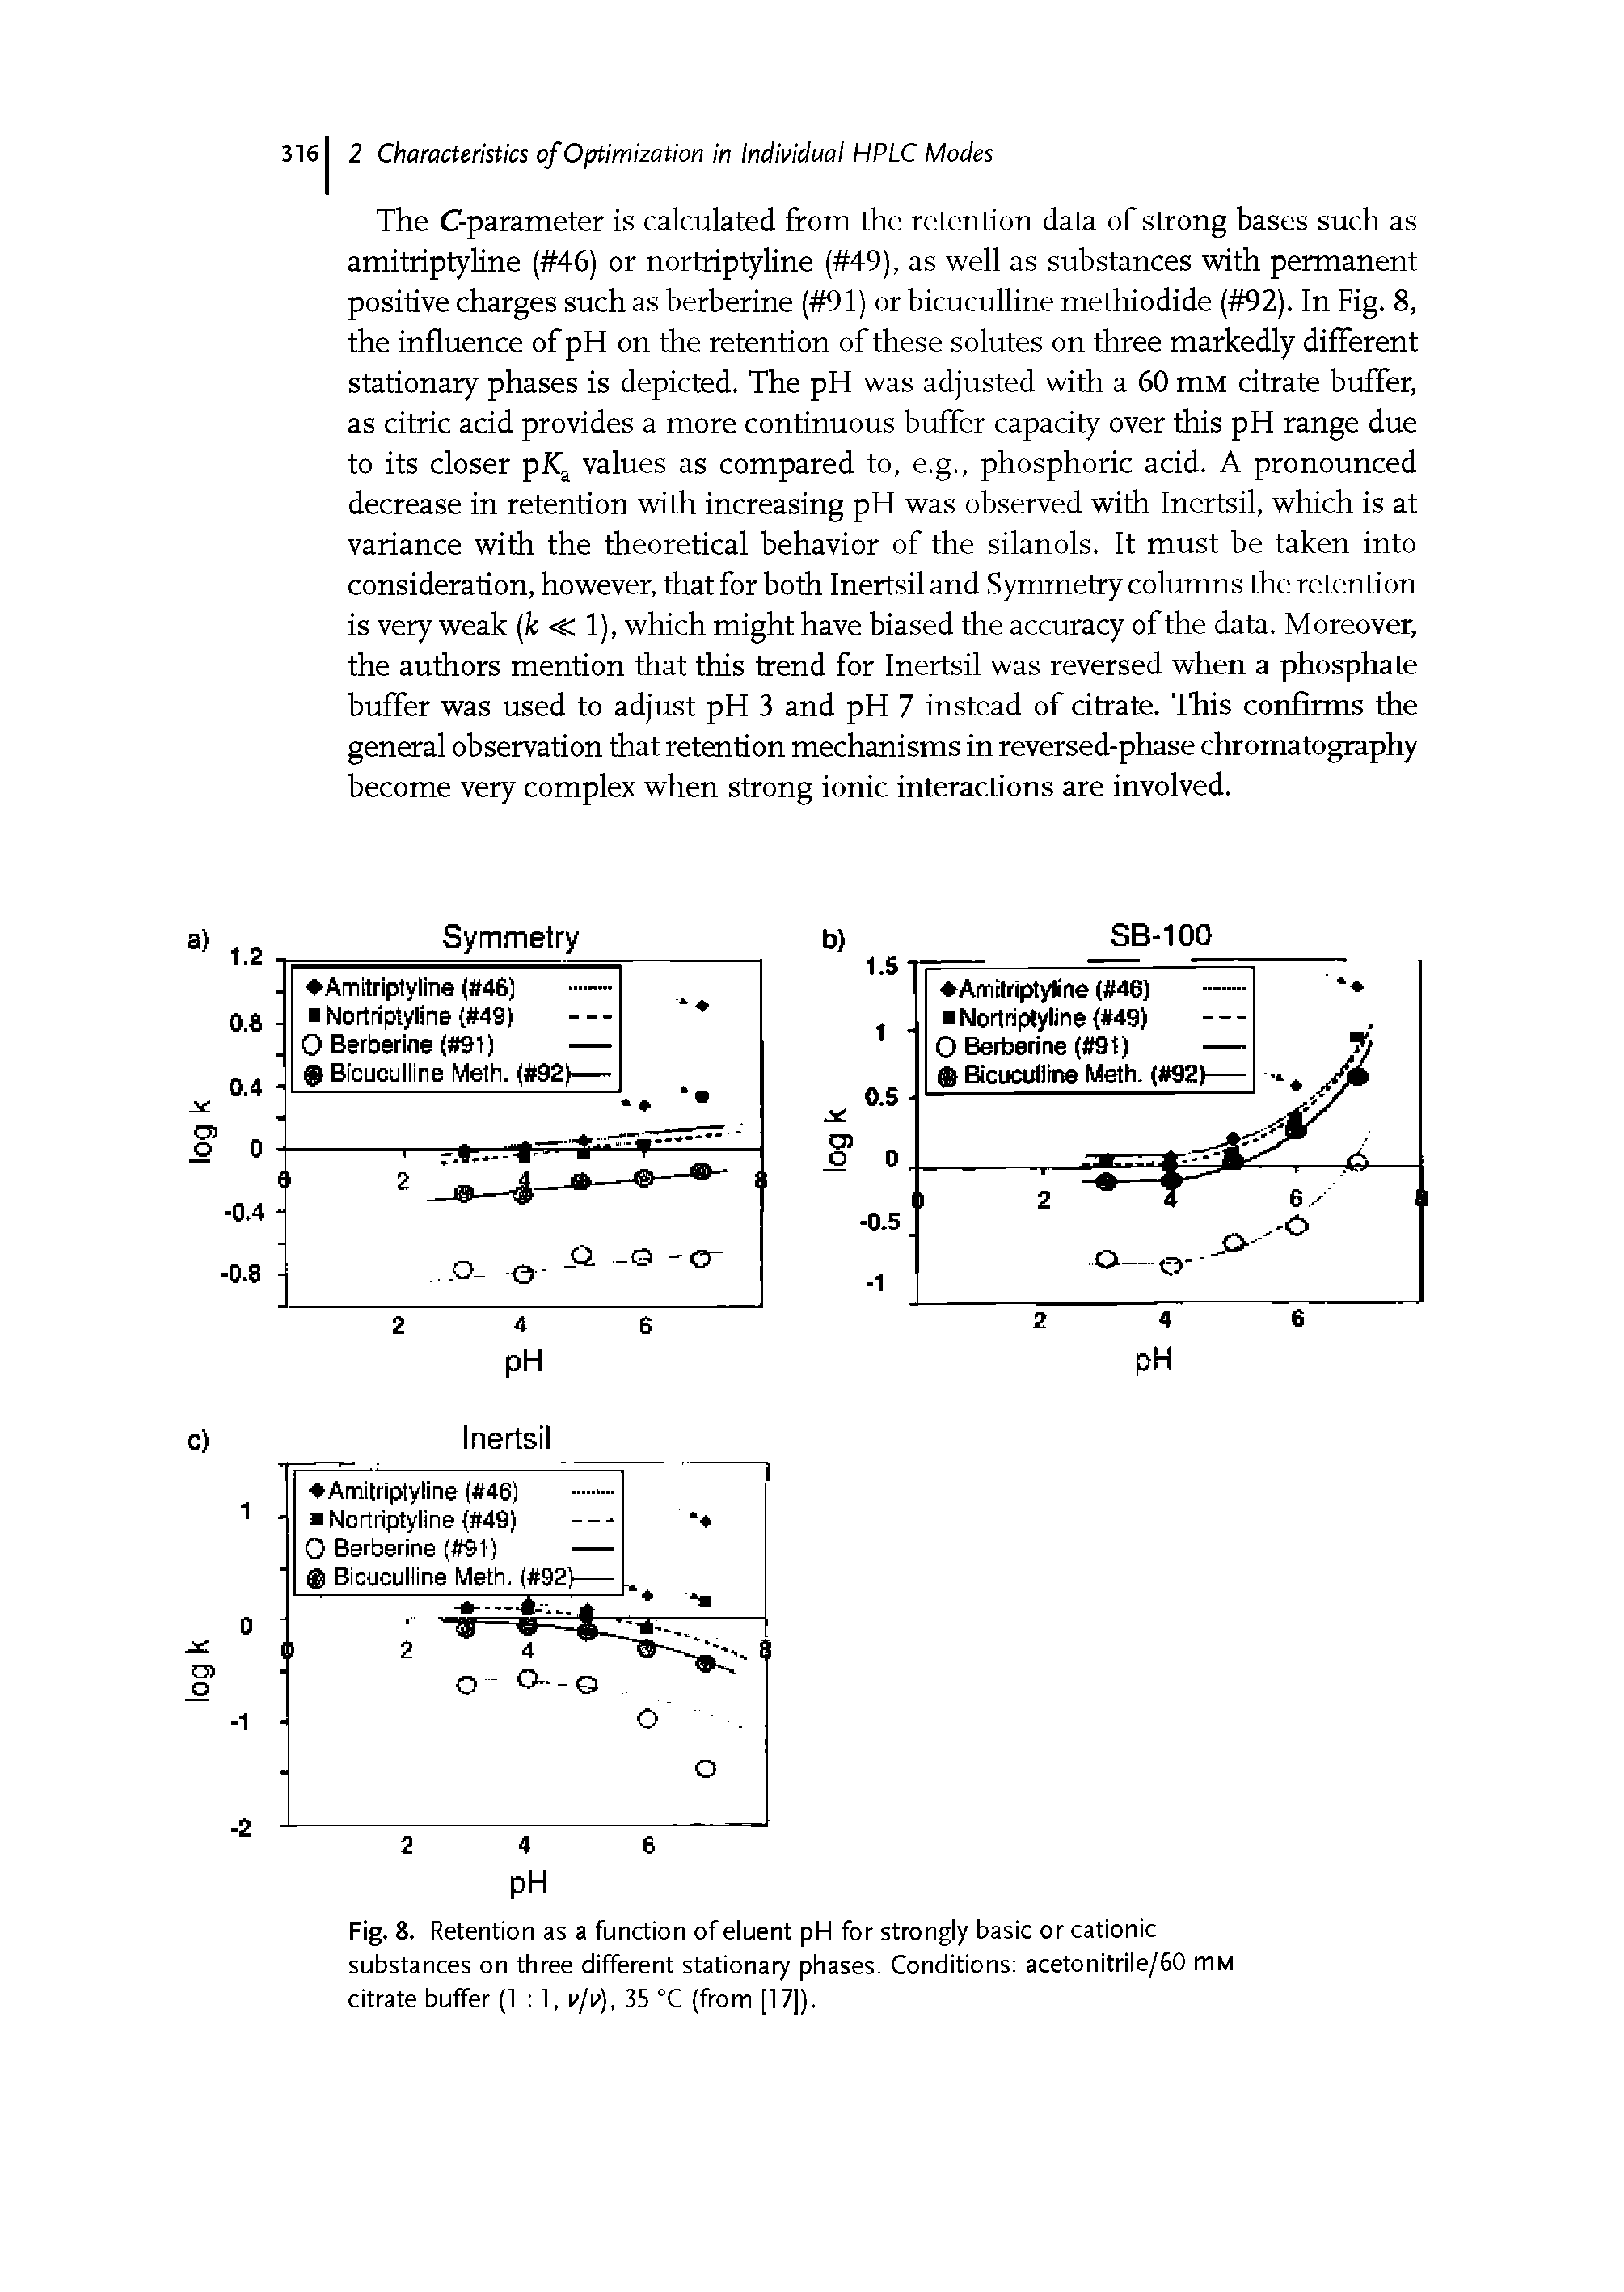 Fig. 8. Retention as a function of eluent pH for strongly basic or cationic substances on three different stationary phases. Conditions acetonitrile/60 mi citrate buffer (1 1, v/v), 35 °C (from [17]).